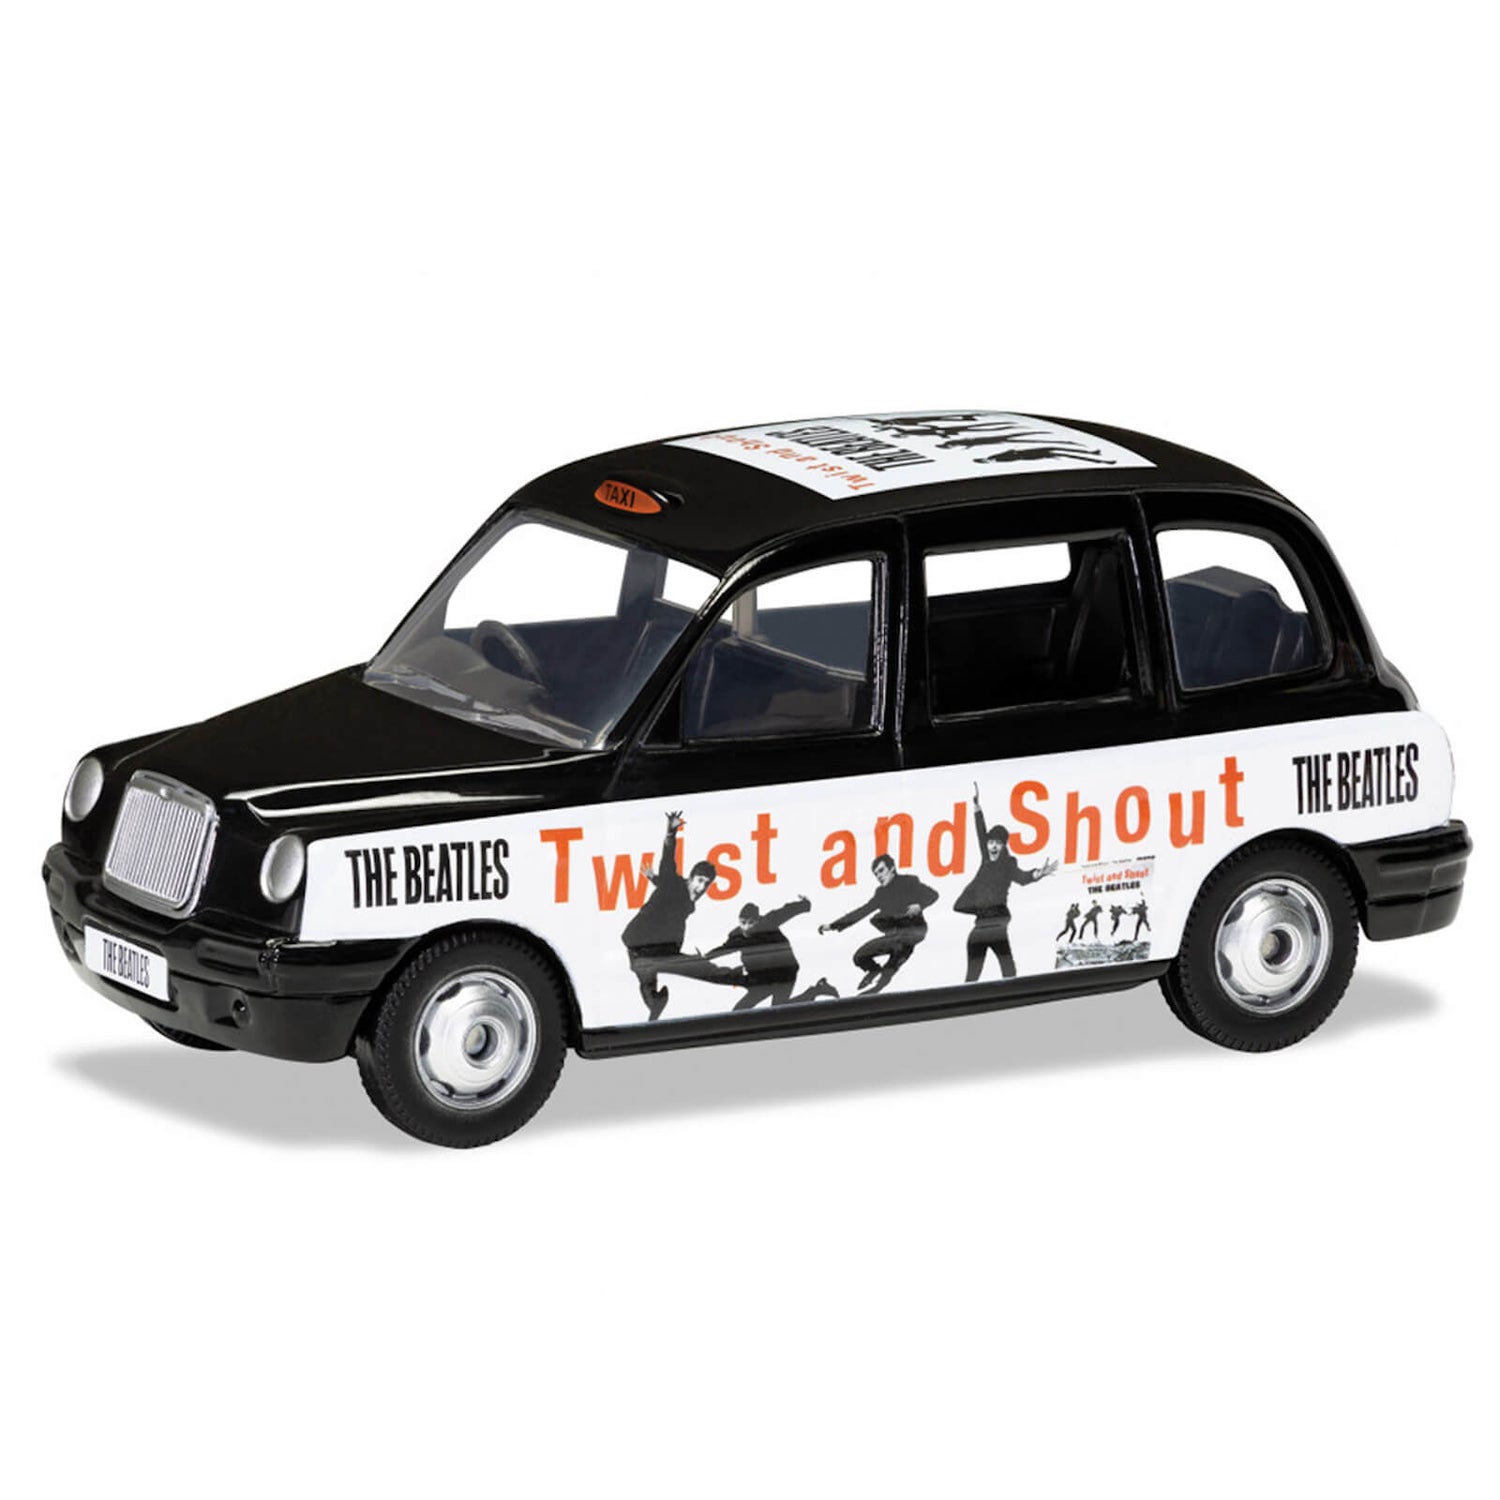 The Beatles London Taxi Twist and Shout Modellset im Maßstab 1:36